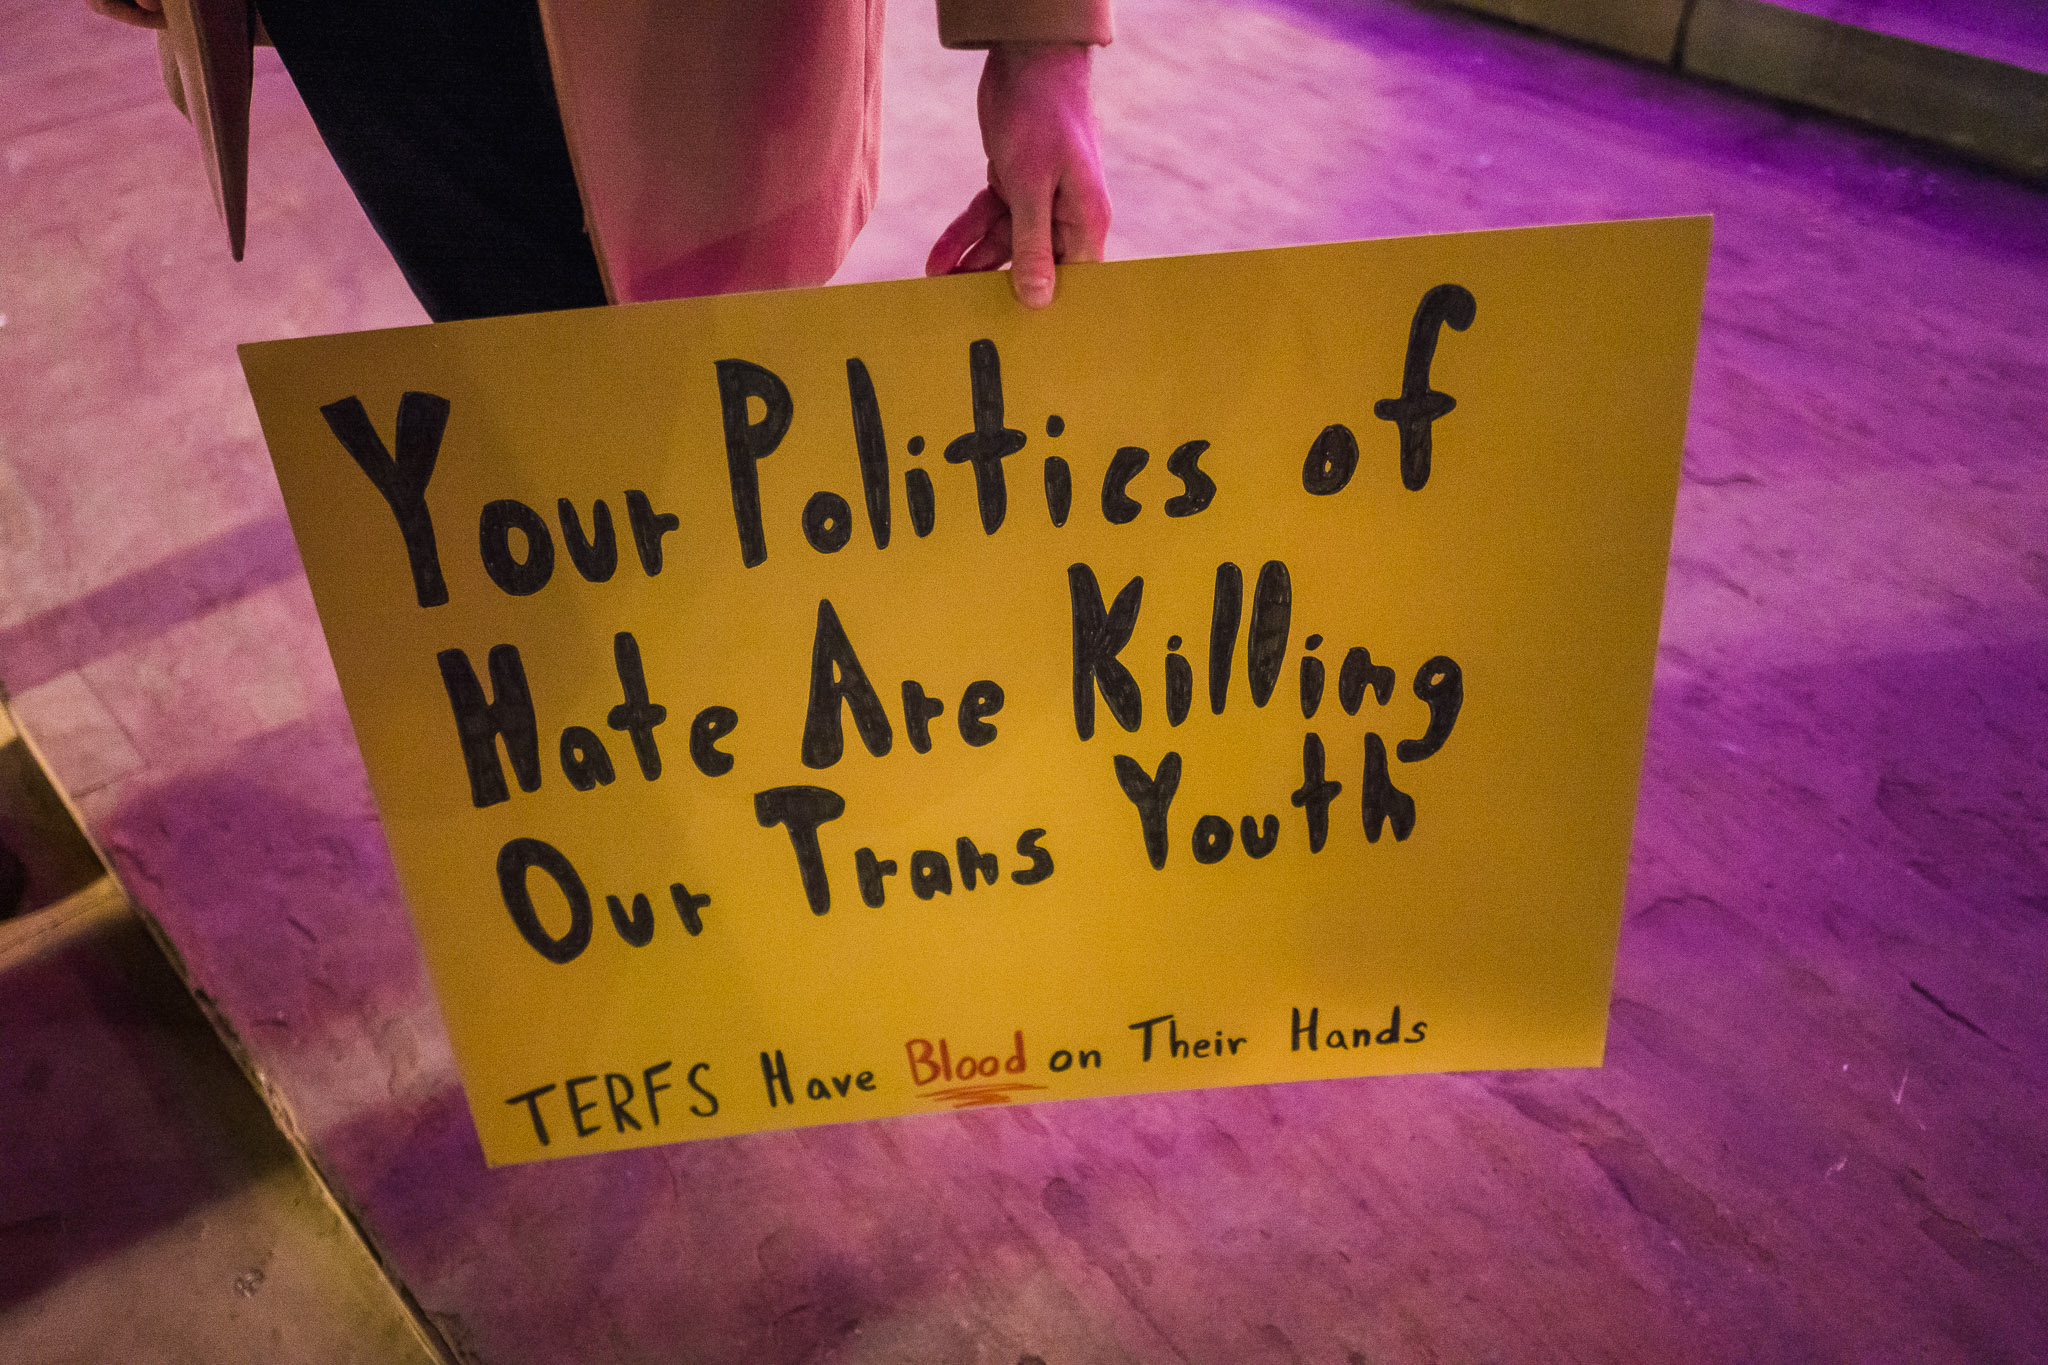 A person holds a sign saying "Your politics of hate are killing our trans youth. TERFs have blood on their hands."